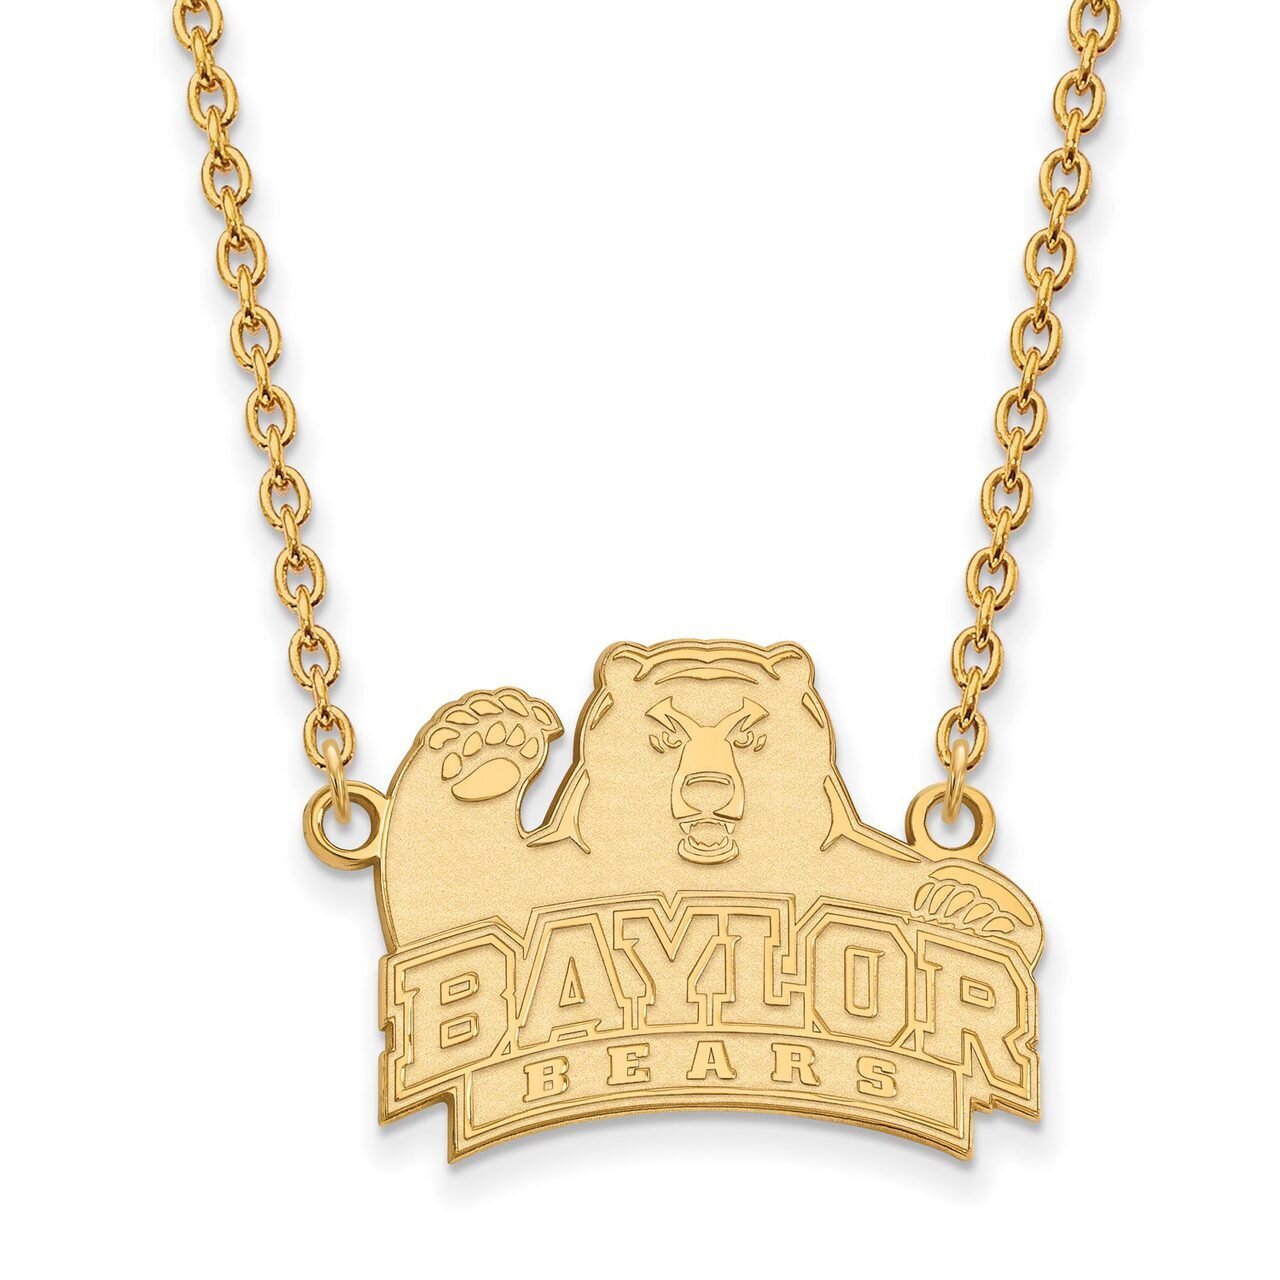 Baylor University Large Pendant with Chain Necklace 14k Yellow Gold 4Y014BU-18